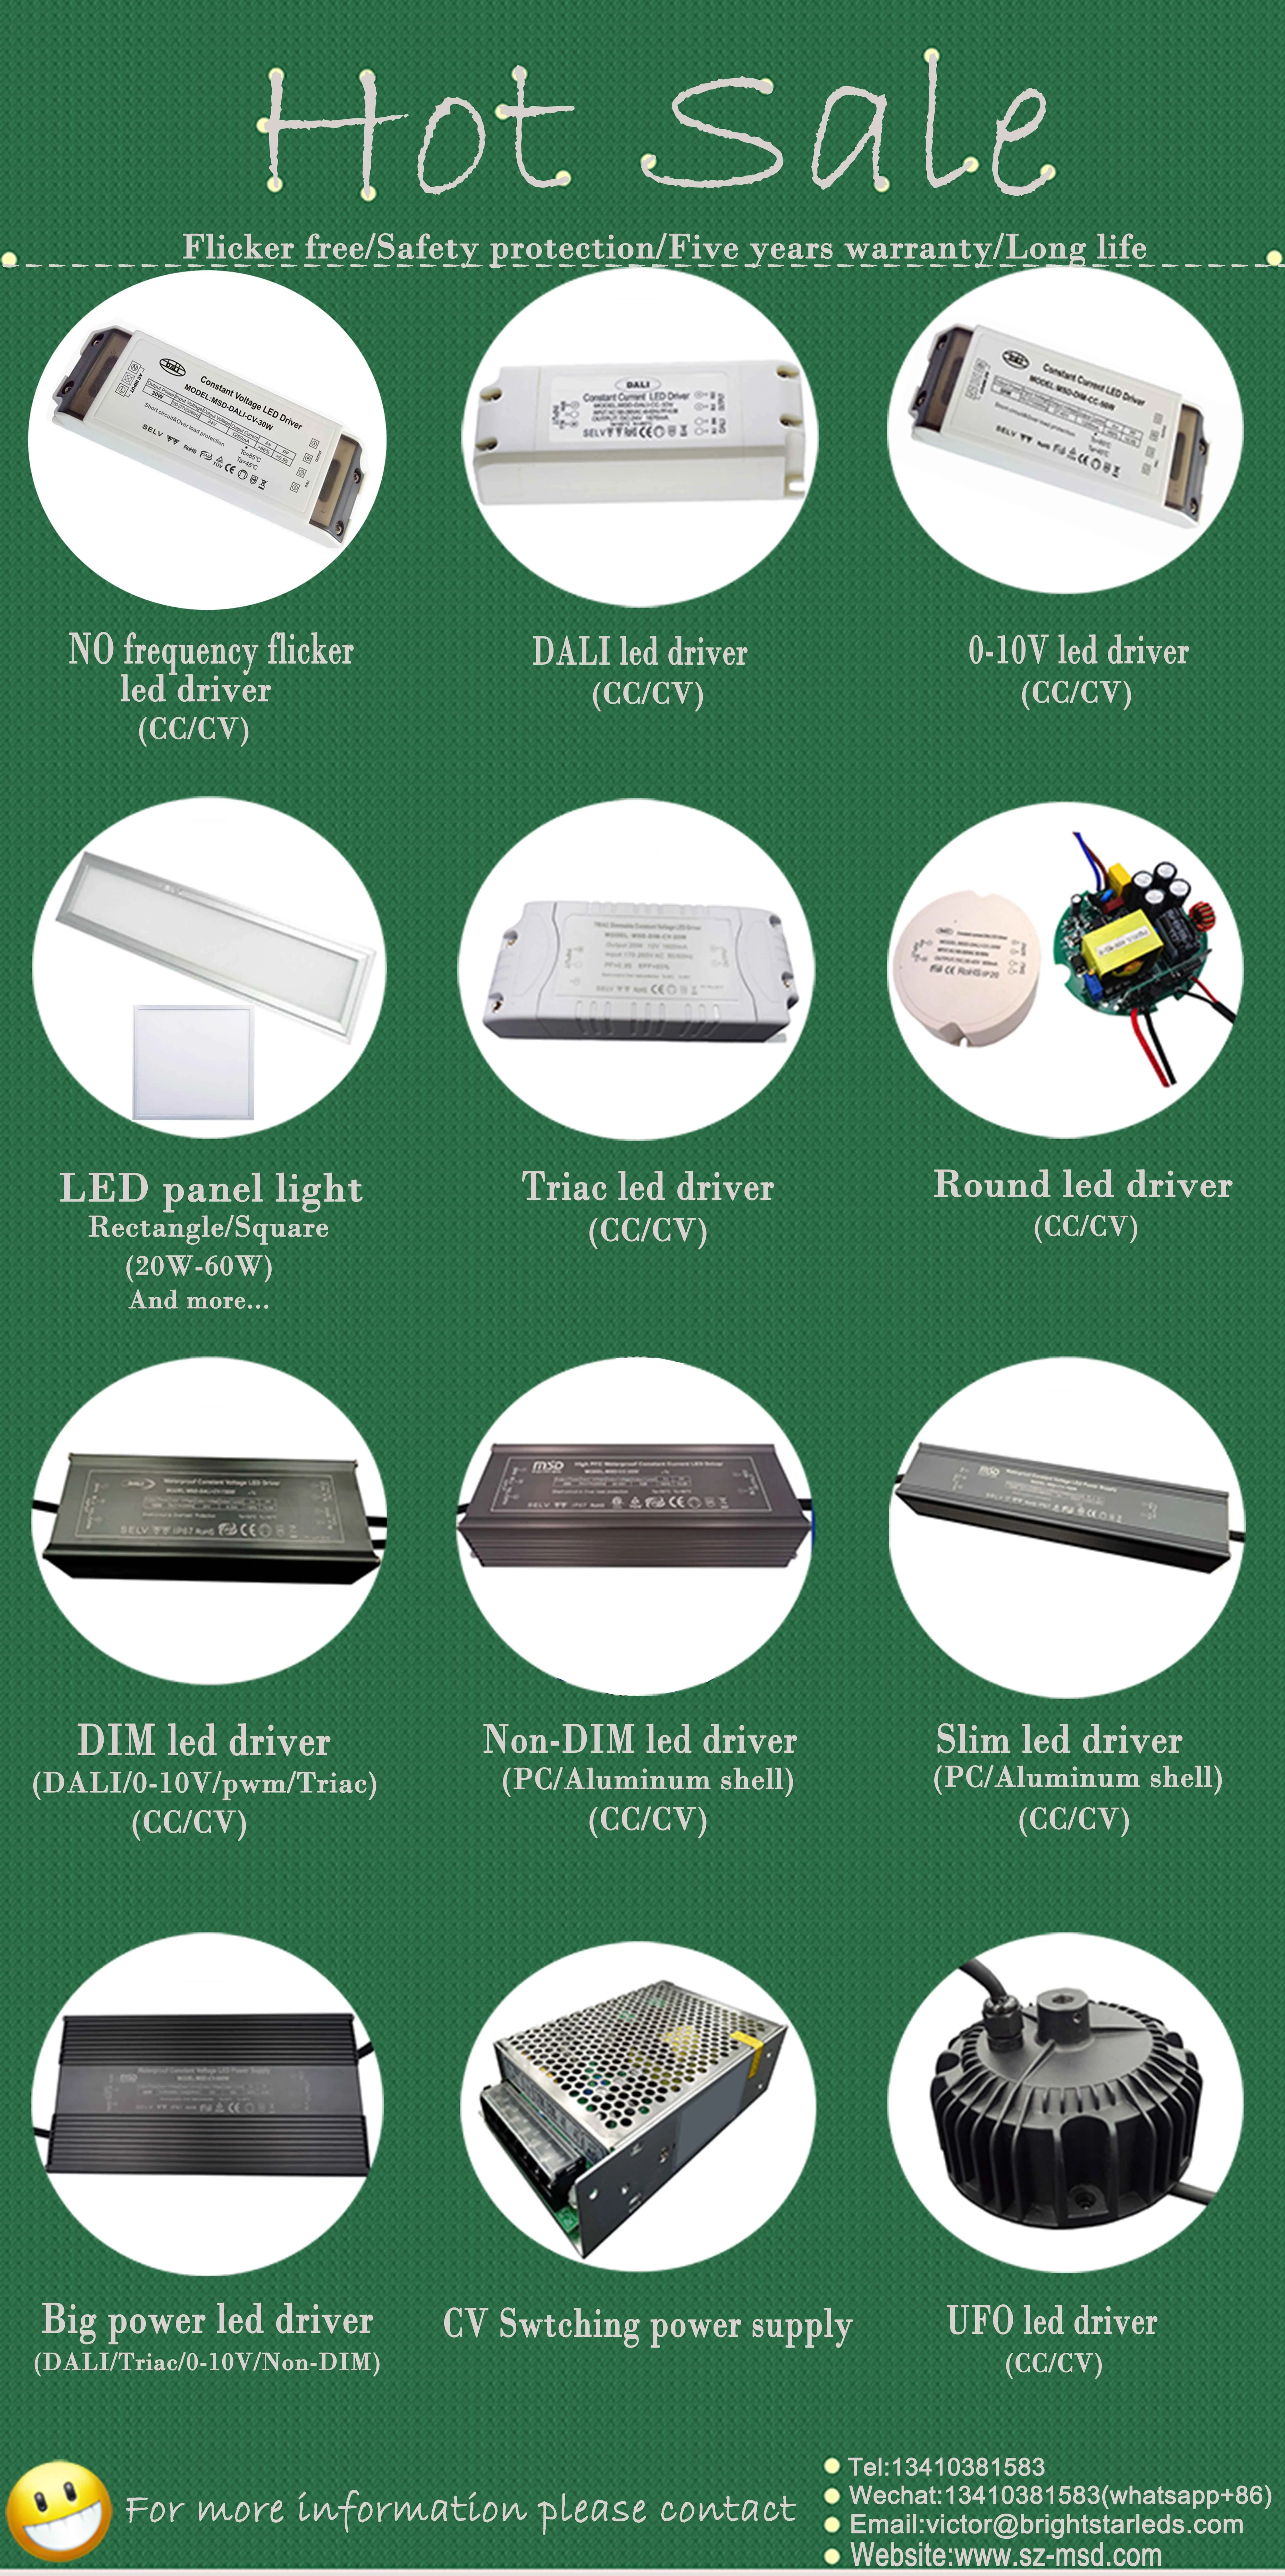 0-10V 110V AC and 230V AC 30W led driver with PWM dimming for indoor and outdoor use of 12V 24V DC led panel lights